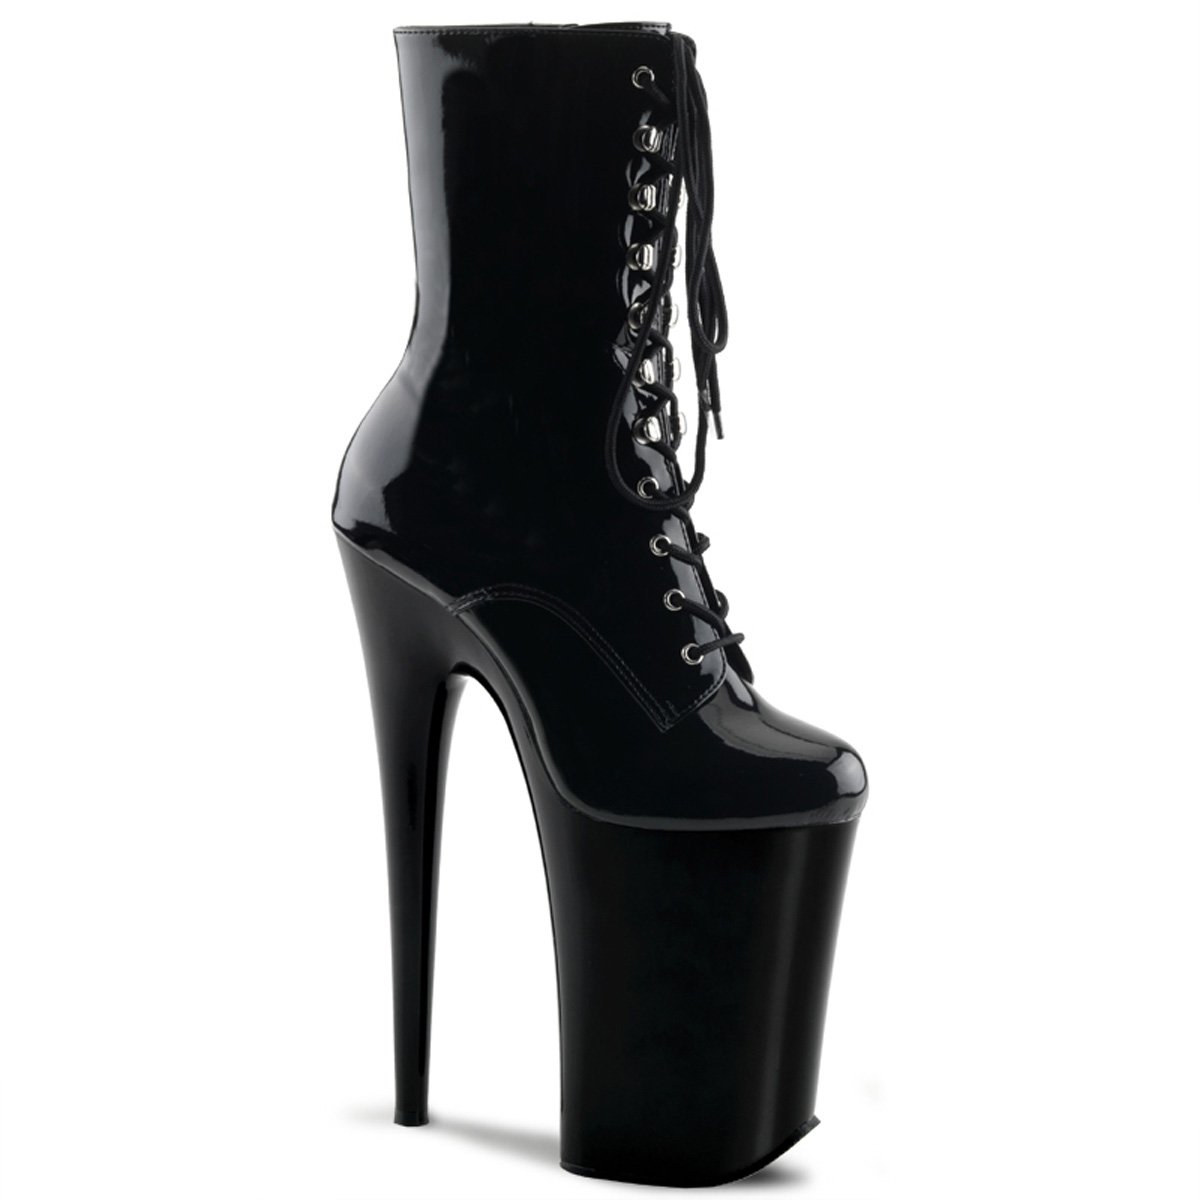 Pleaser Infinity-1020 Platforms | Buy Sexy Shoes at Shoefreaks.ca